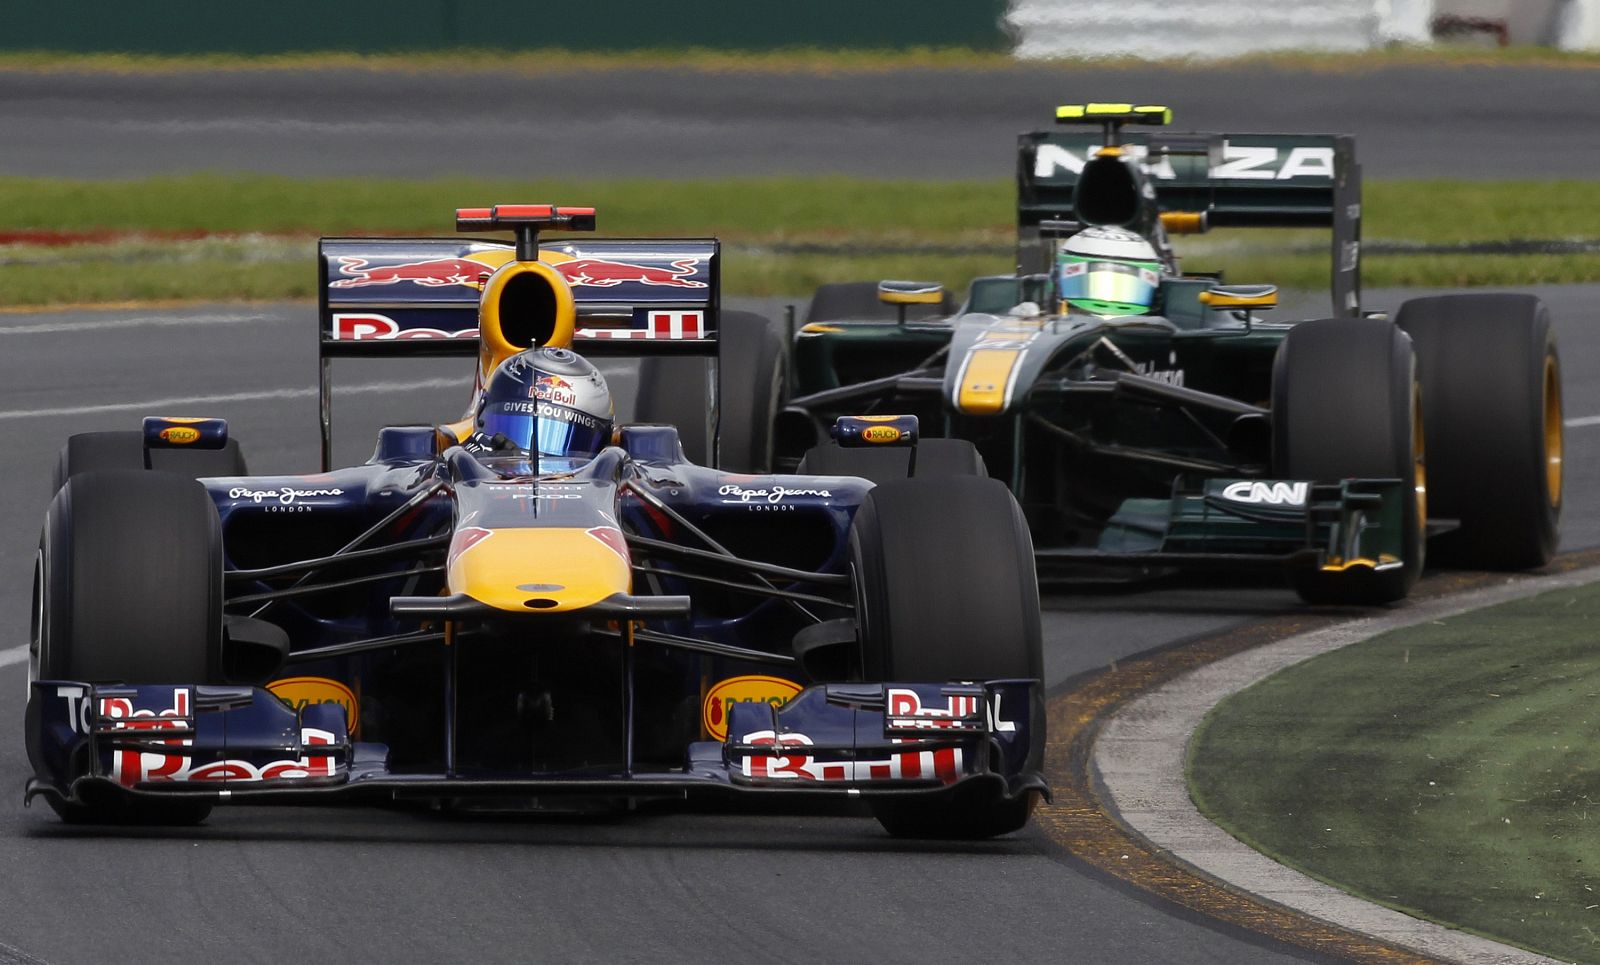 Red Bull Formula One driver Sebastian Vettel of Germany drives ahead of Lotus F1 driver Heikki Kovalainen of Finland during the first practice session of the Australian F1 Grand Prix in Melbourne